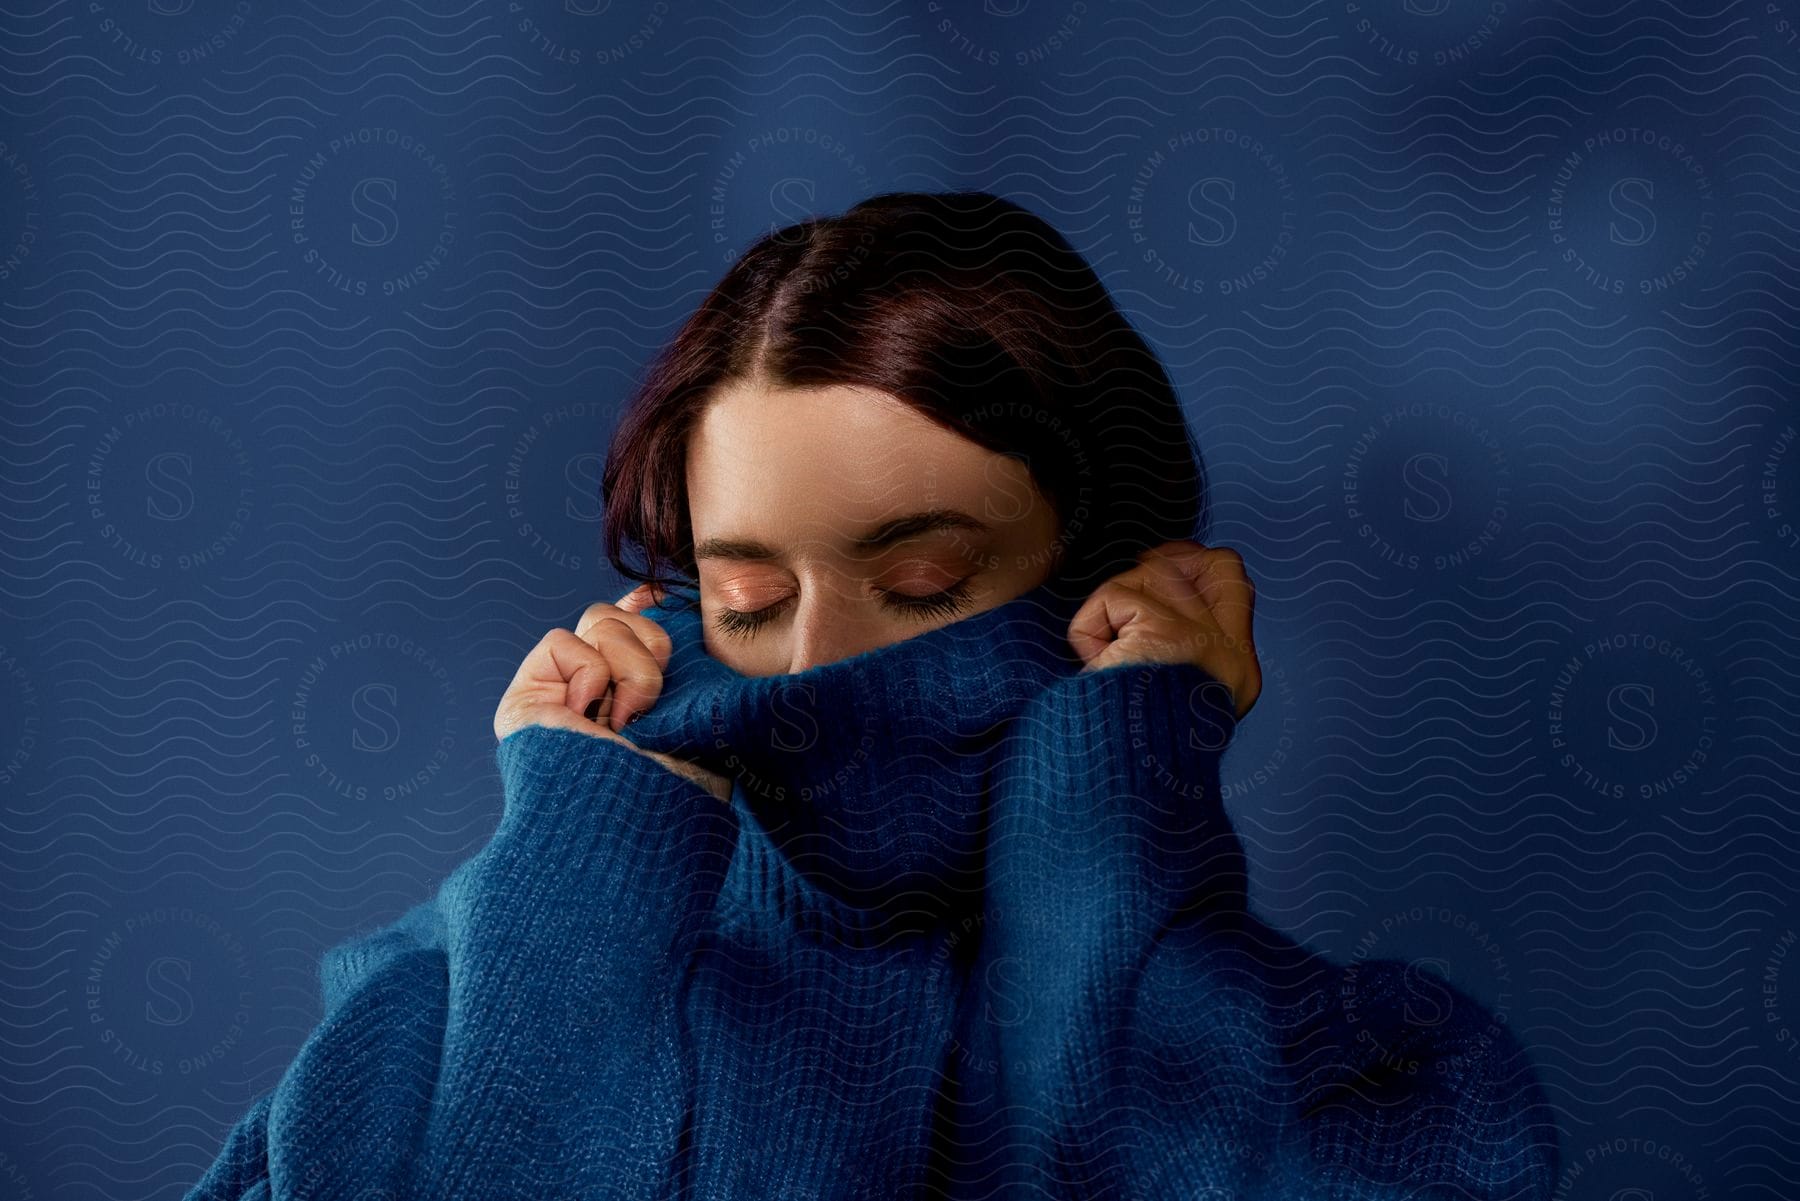 A woman with her eyes closed, wearing a large blue sweater in front of a blue background, pulling the collar up over her nose.